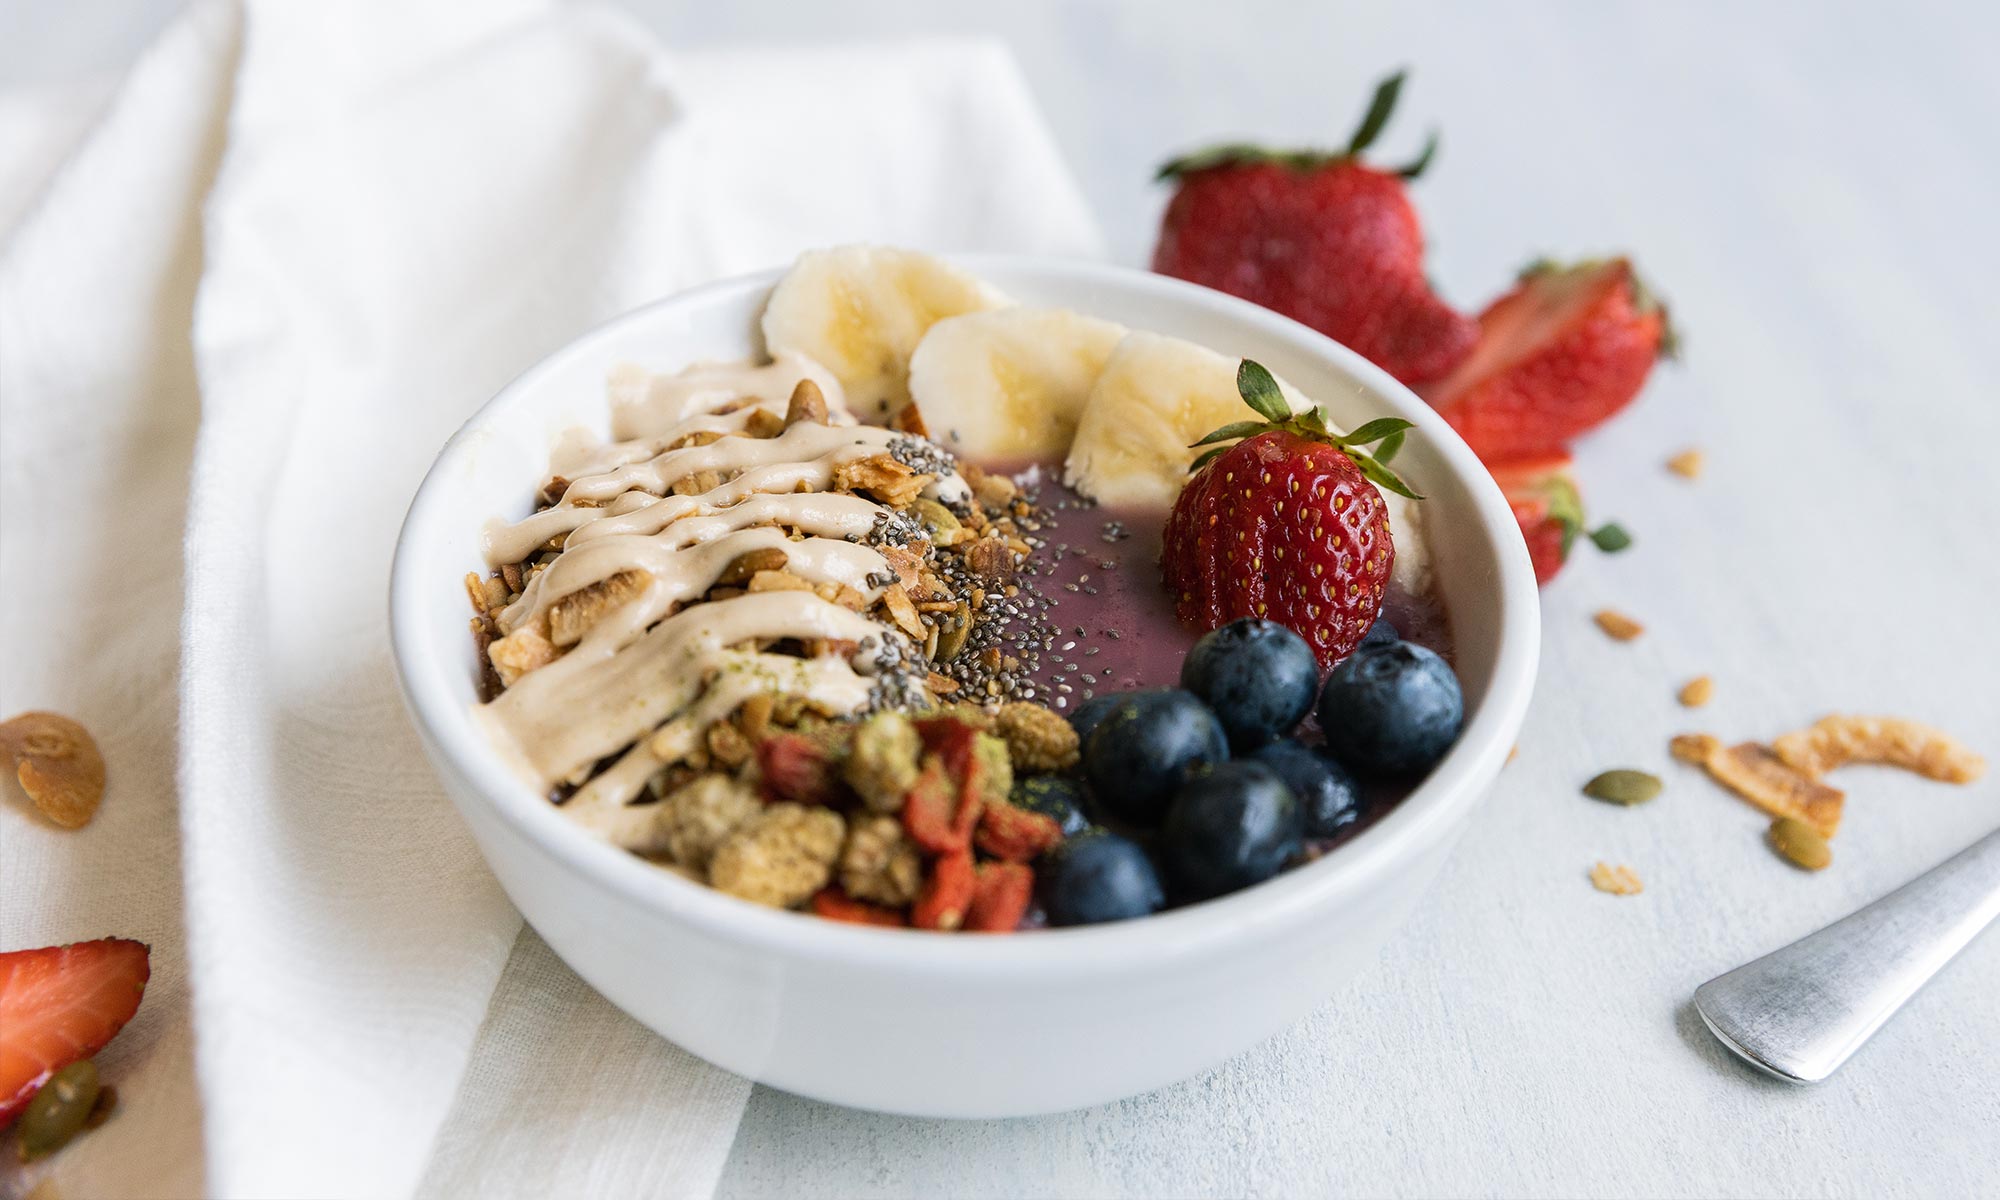 Acai bowls have supplanted kale chips as the health food world's biggest  nutritional darling.